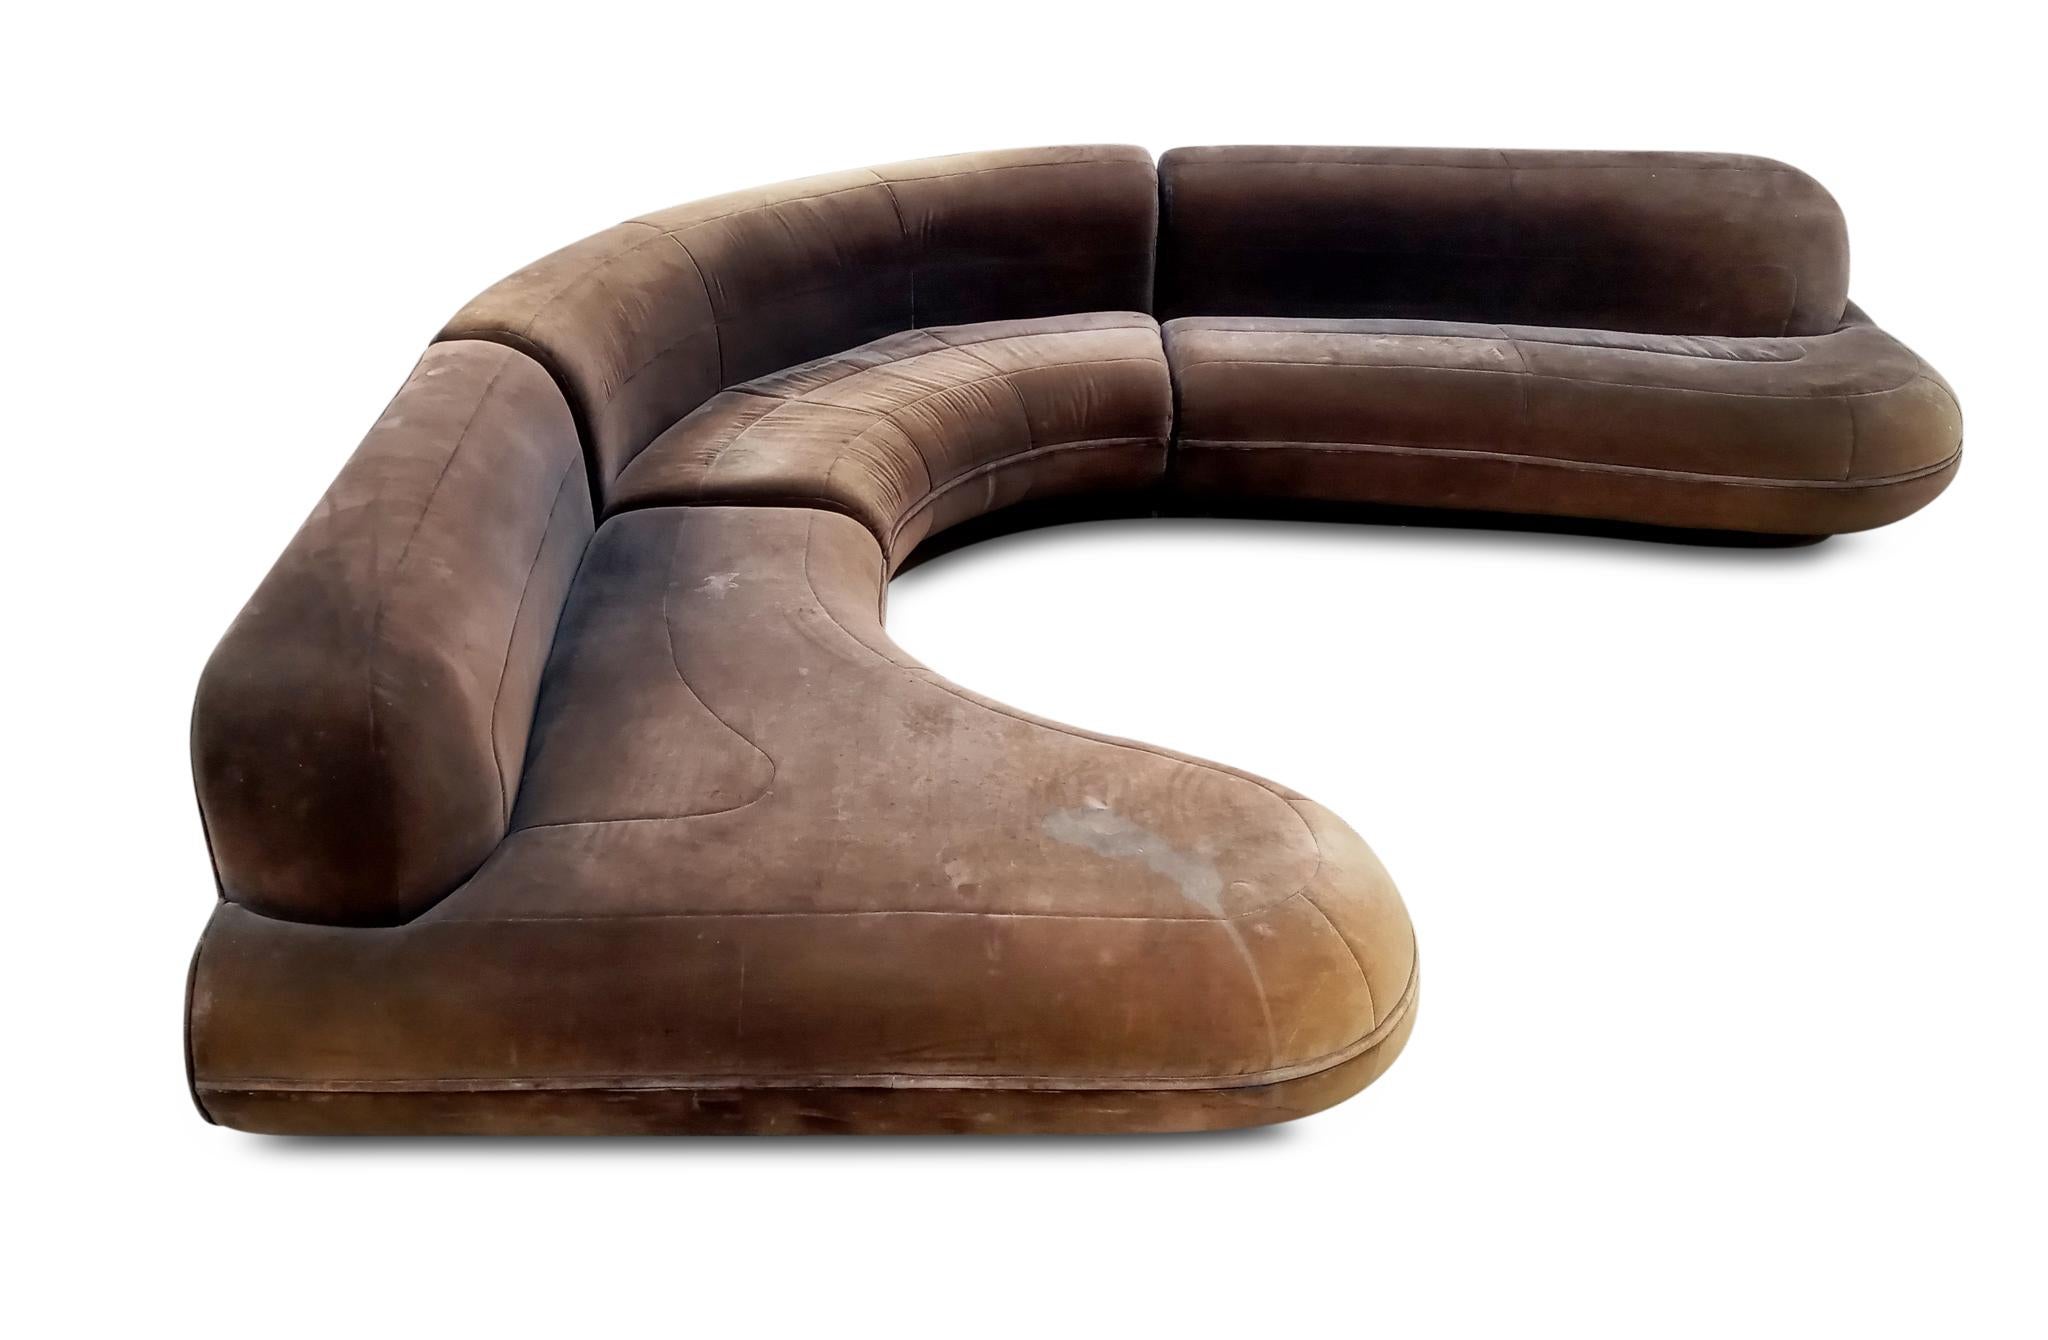 Post-Modern M. Fillmore Harty, Preview Super Sculptural Signed 3 Part Sectional Sofa 1990s